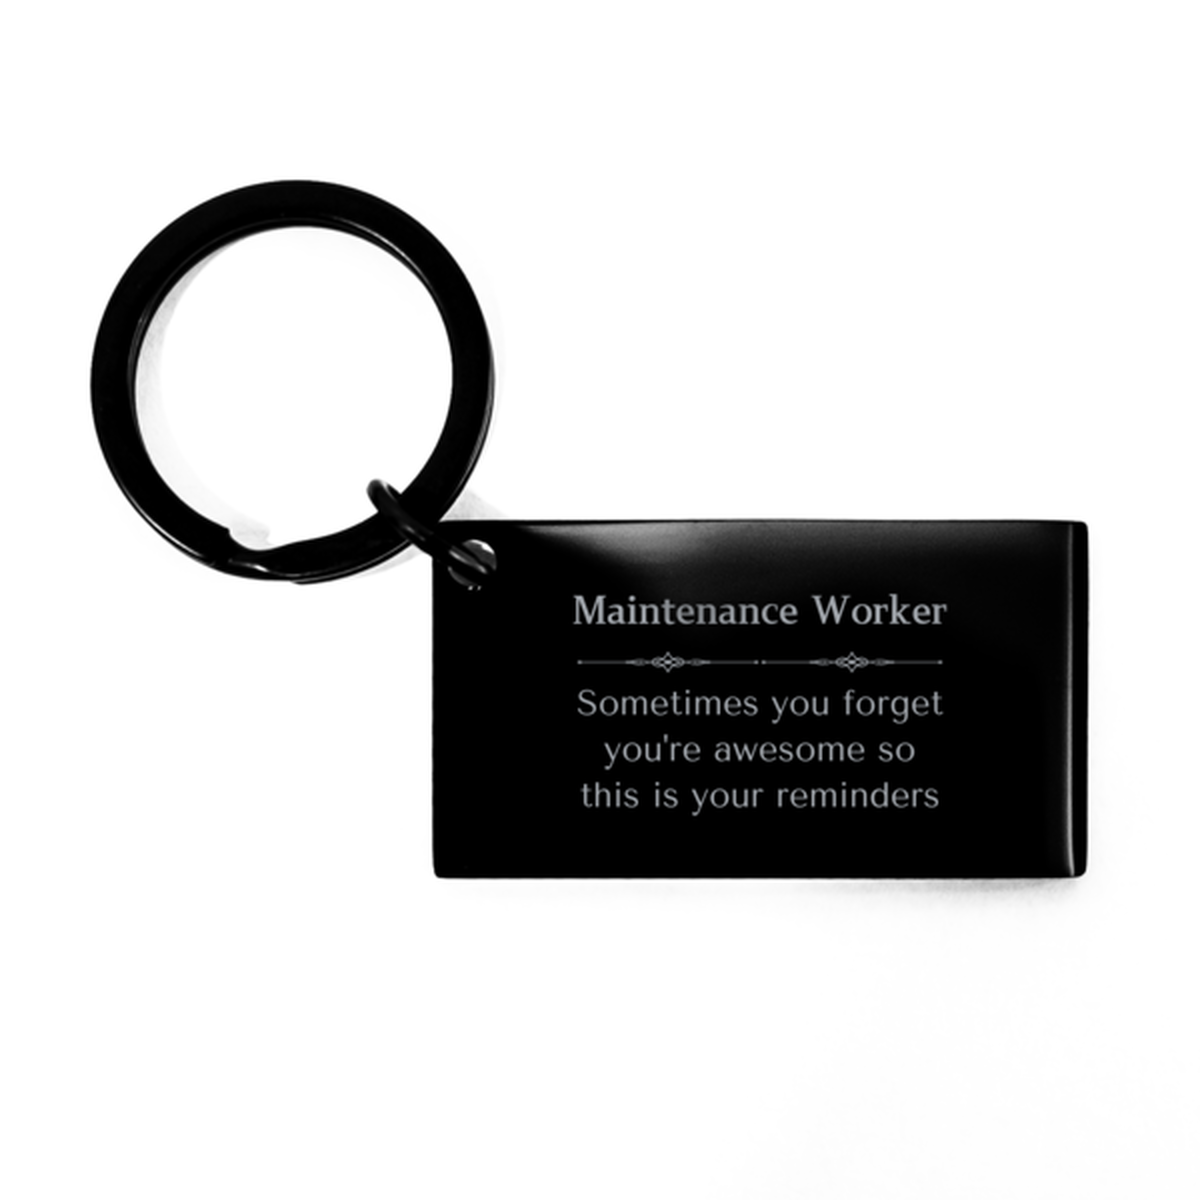 Sentimental Maintenance Worker Keychain, Obstetrician Sometimes you forget you're awesome so this is your reminders, Graduation Christmas Birthday Gifts for Maintenance Worker, Men, Women, Coworkers